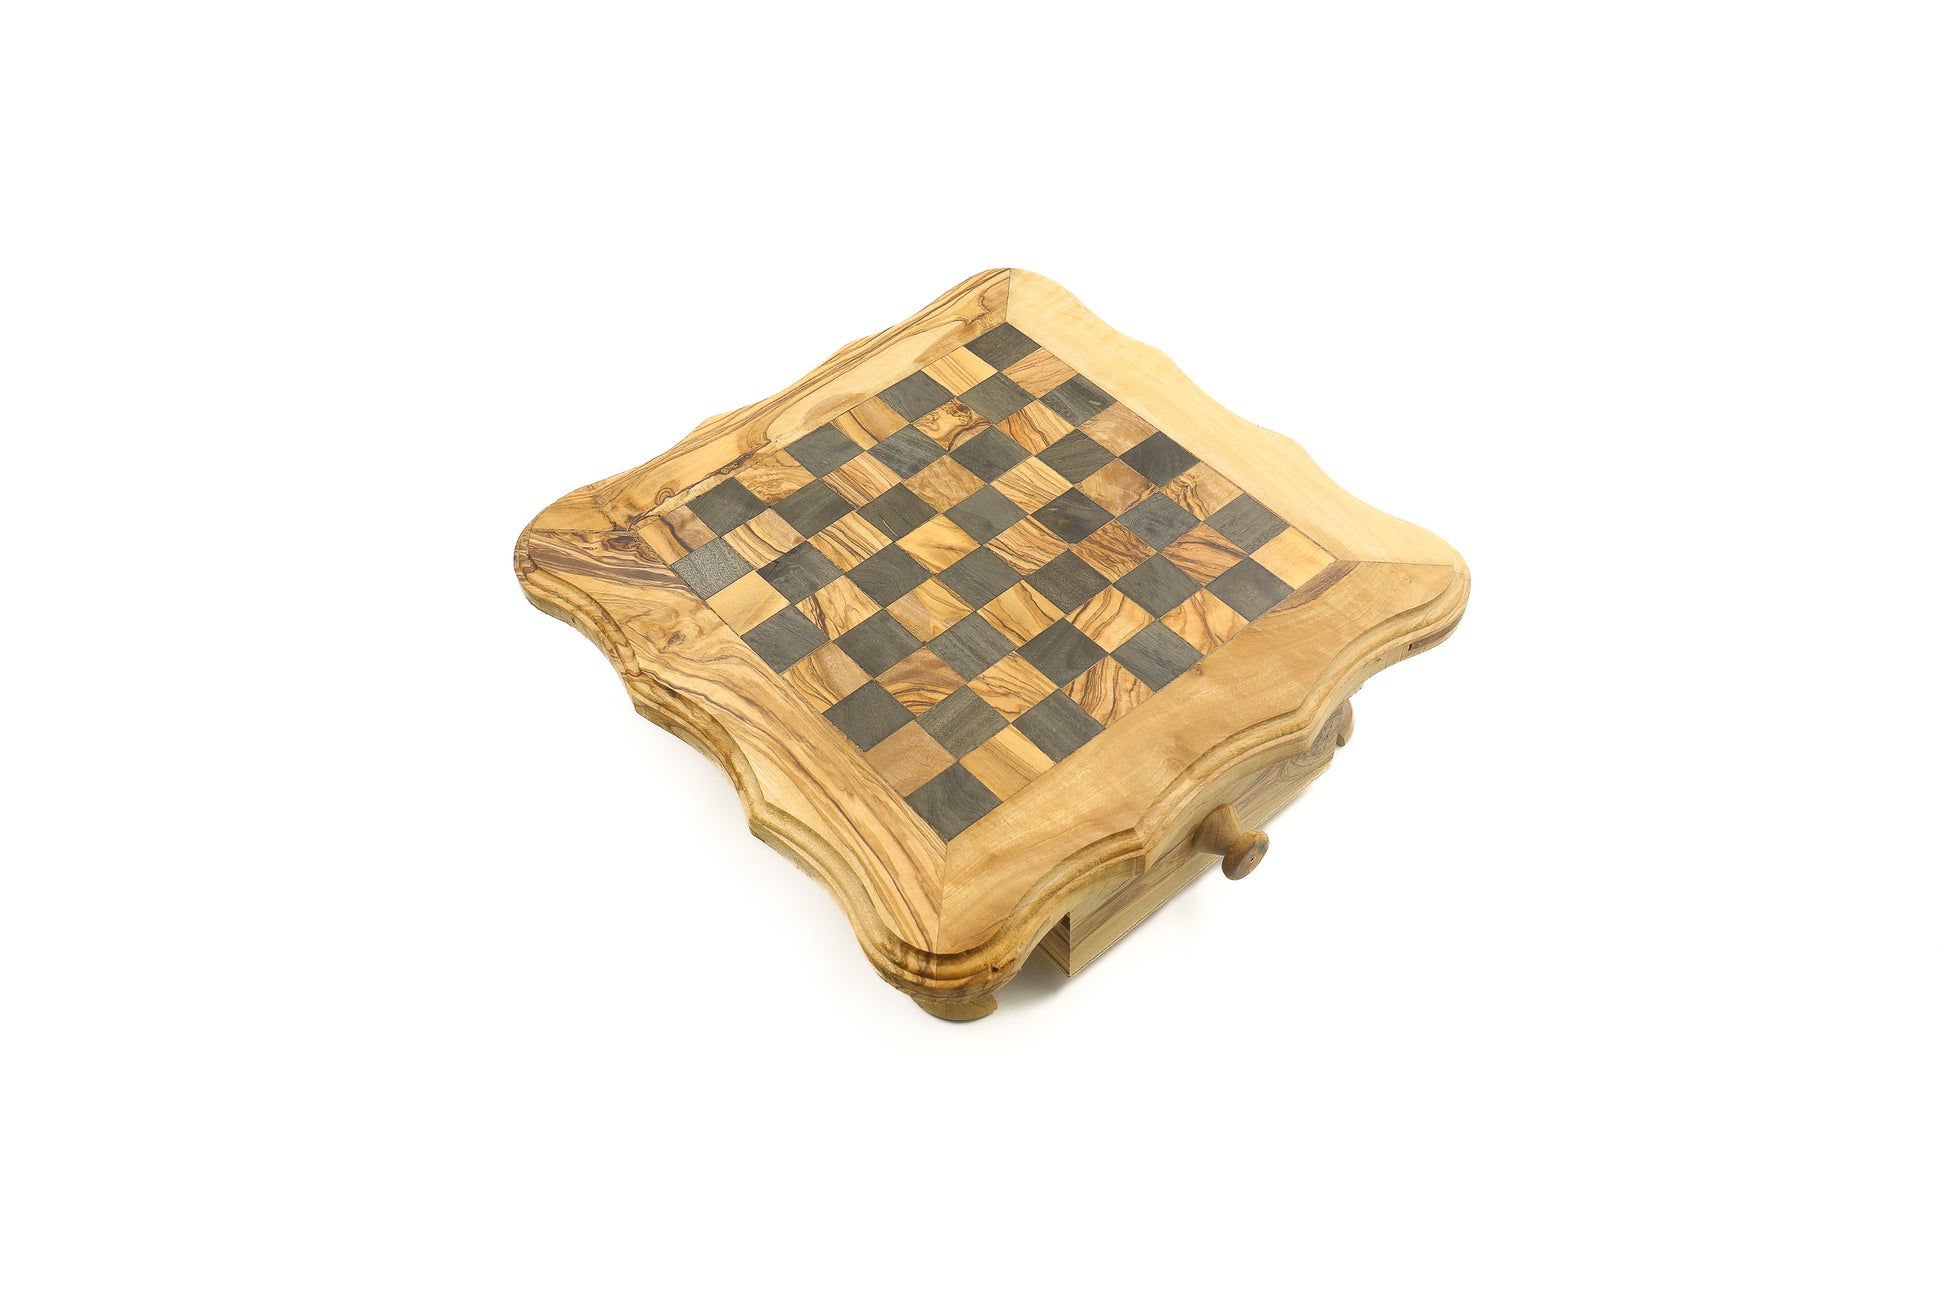 Unique and sustainable olive wood chess set for hours of enjoyment